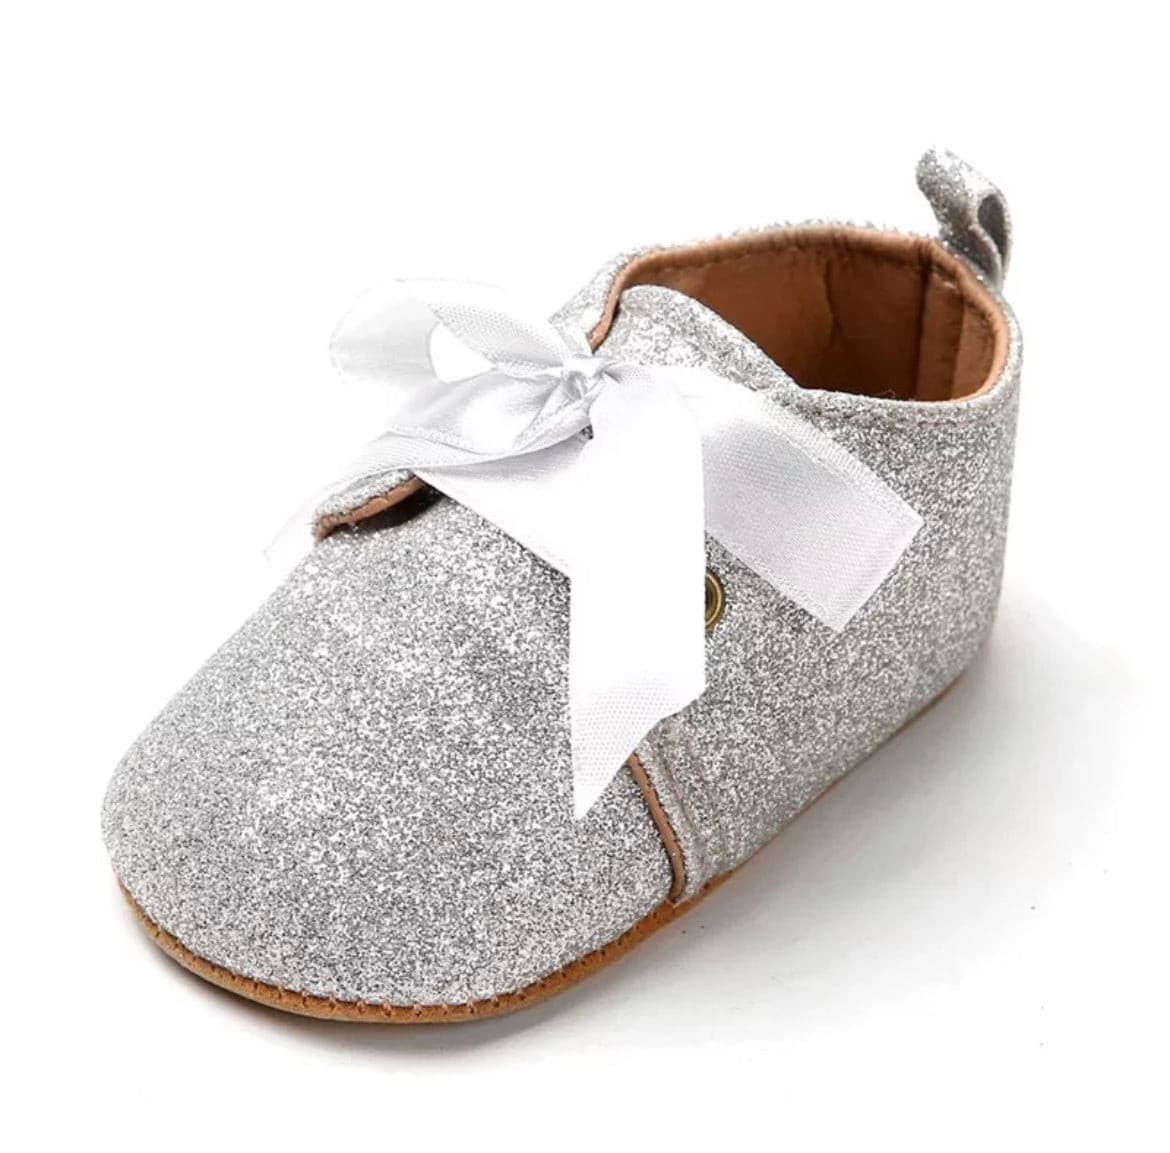 Glitterati- Silver Glitter Baby Shoes - First Walker Vegan Leaher with Velcro Straps.